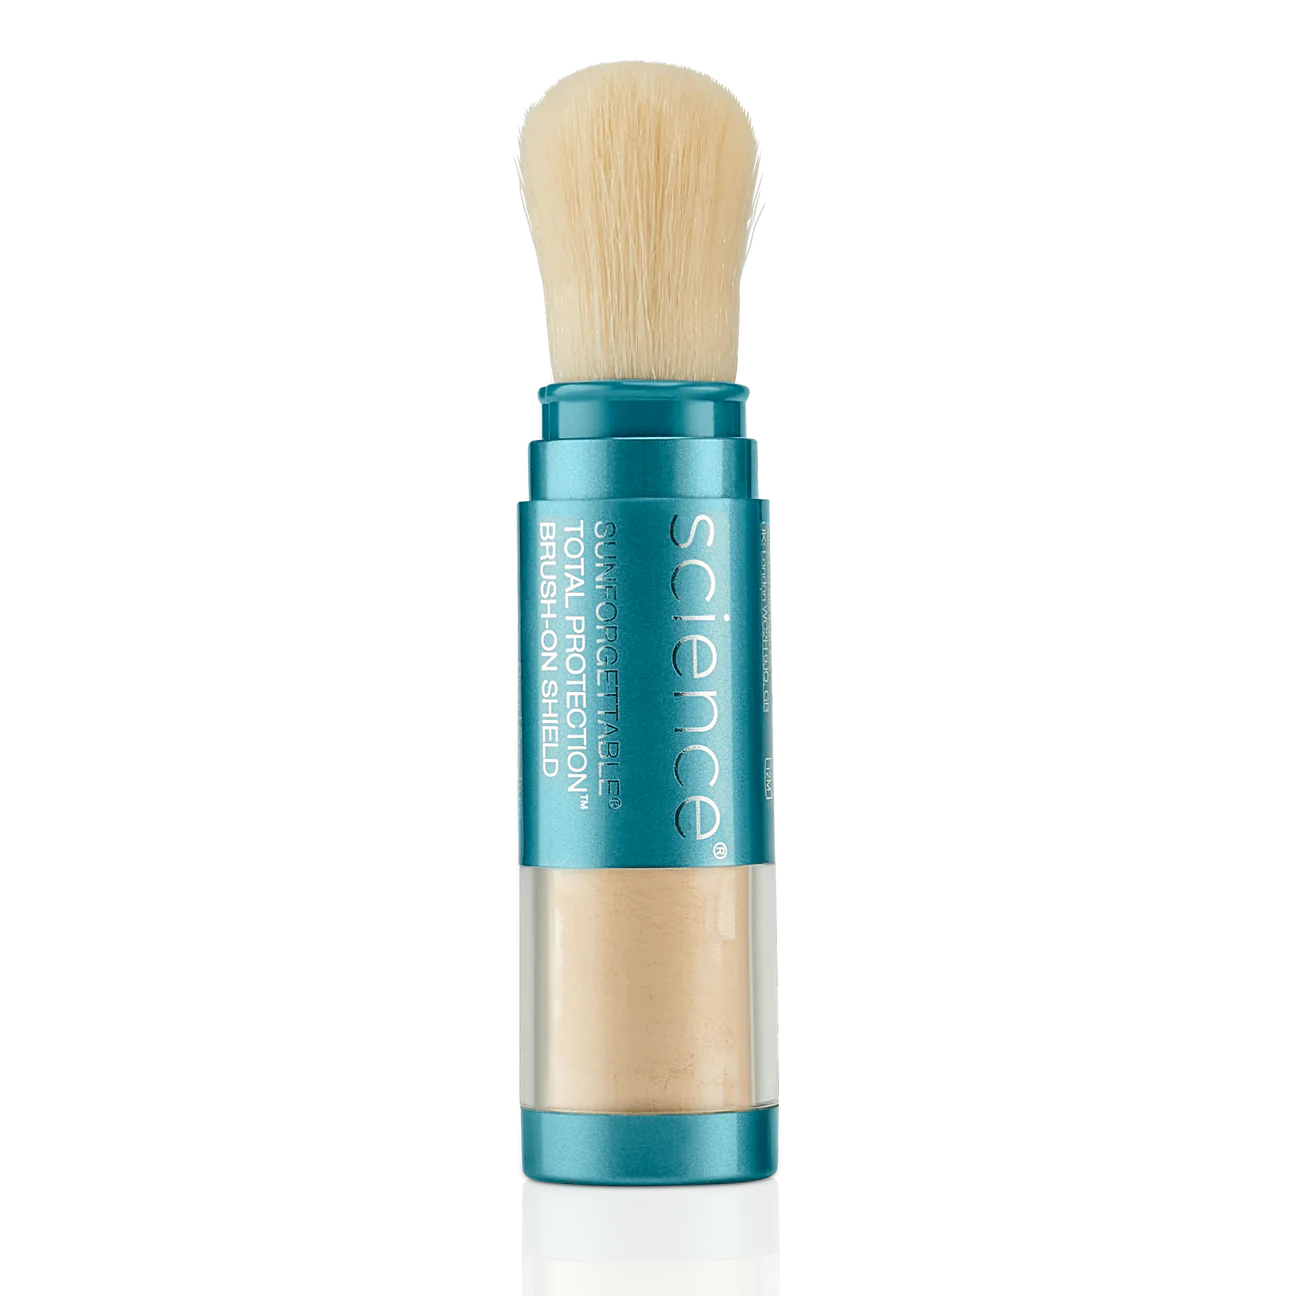 Colorescience Sunforgettable Total Protection Brush-On Shield SPF 50 in Fair